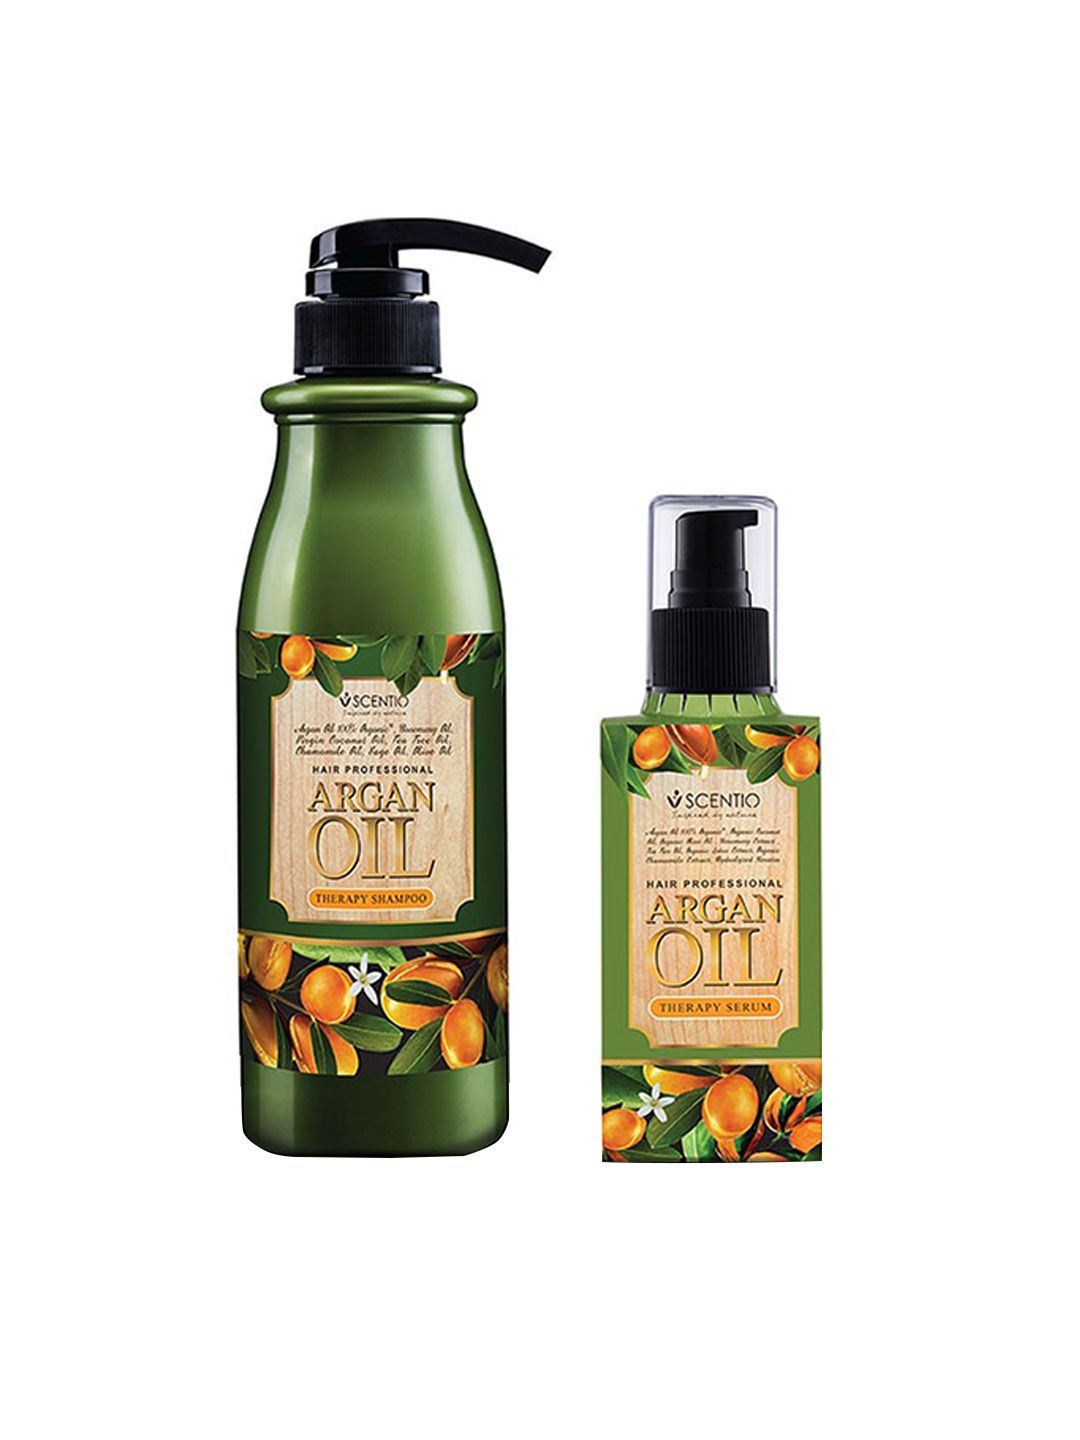 BEAUTY BUFFET Set of 2 Scentio Hair Professional Argan Oil Therapy Shampoo & Serum Price in India